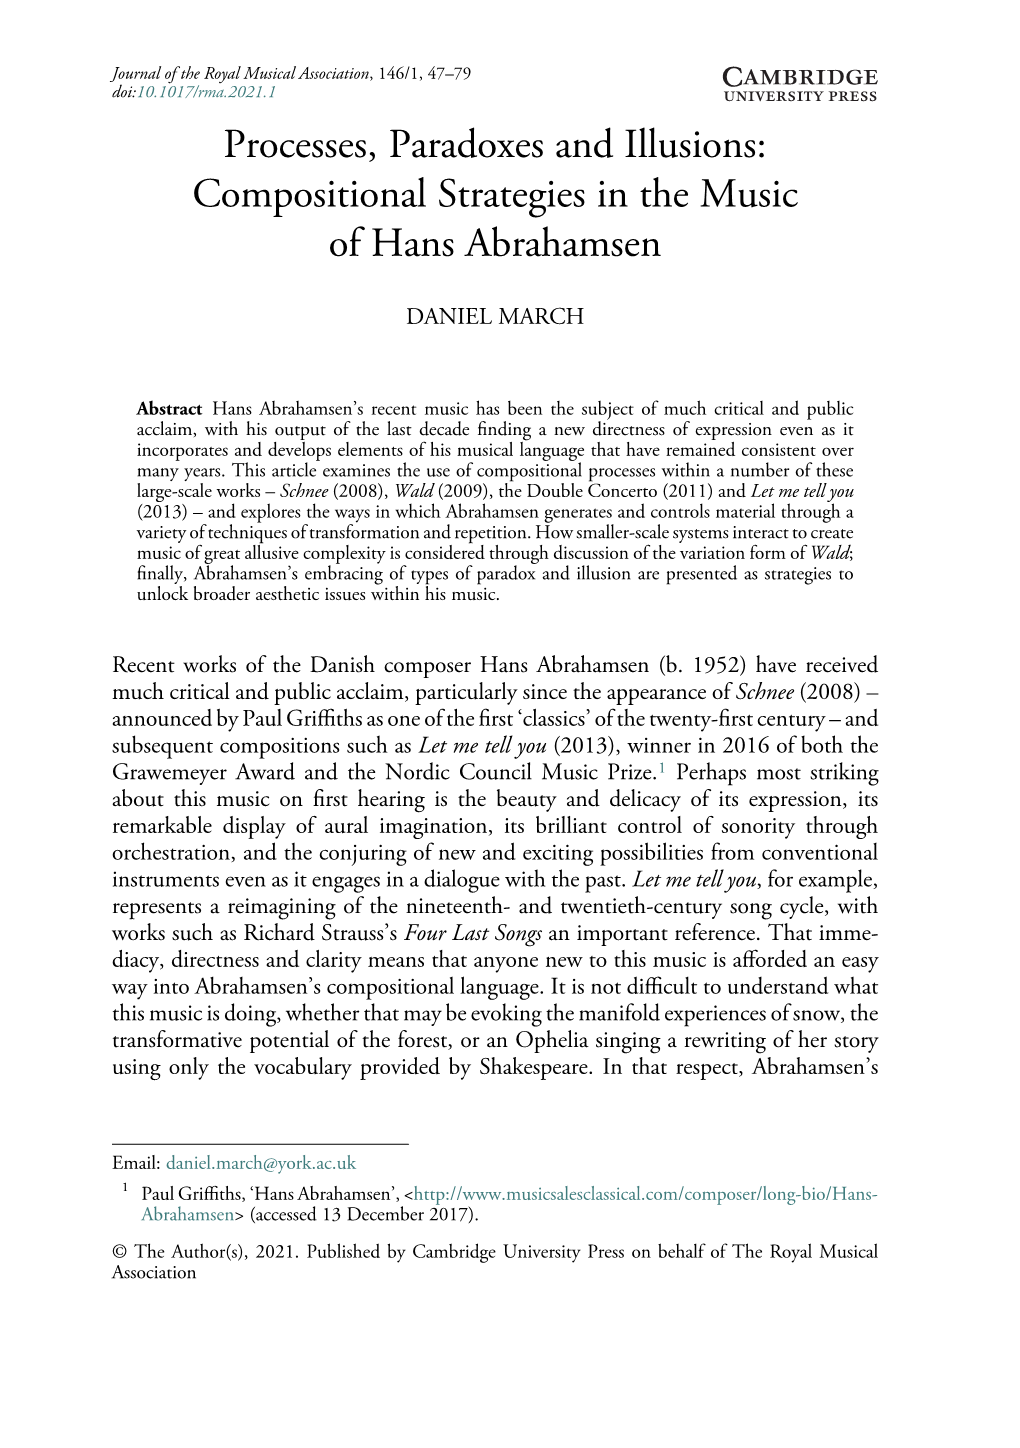 Compositional Strategies in the Music of Hans Abrahamsen